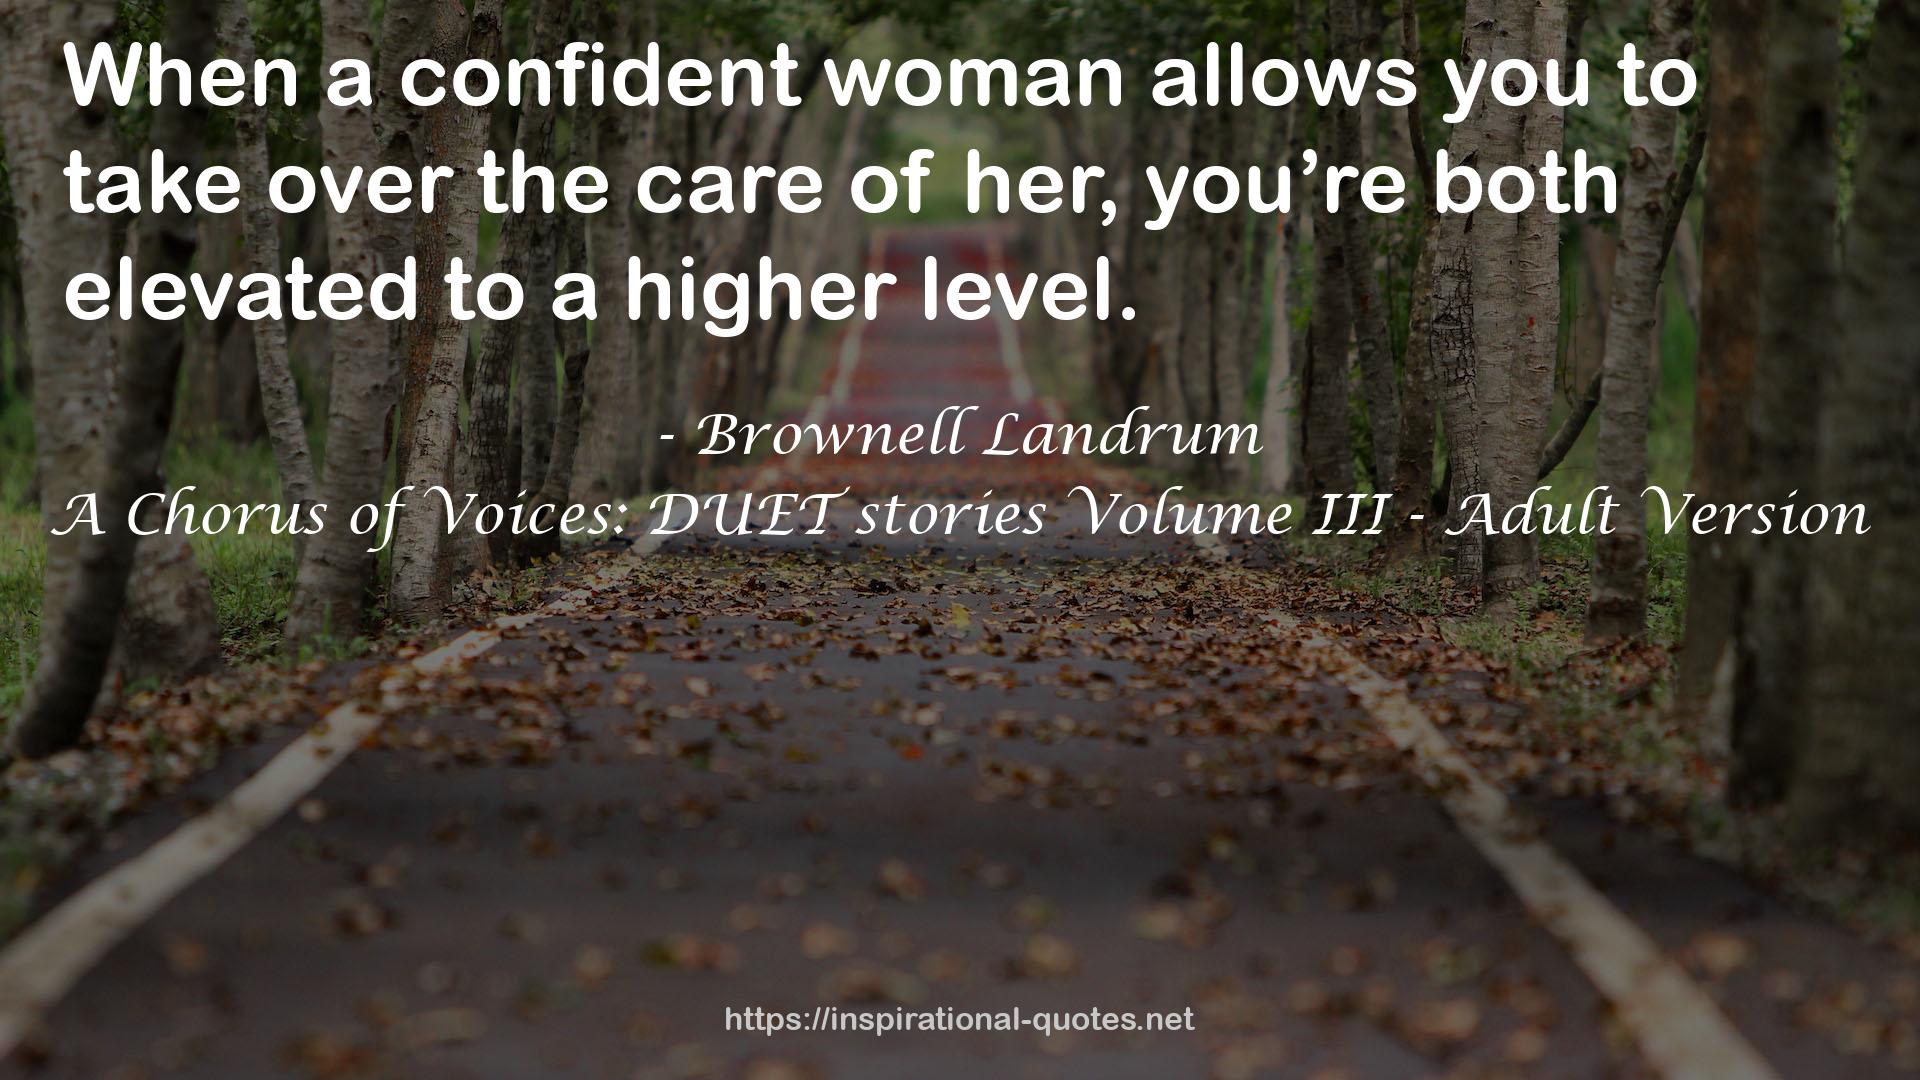 Brownell Landrum QUOTES